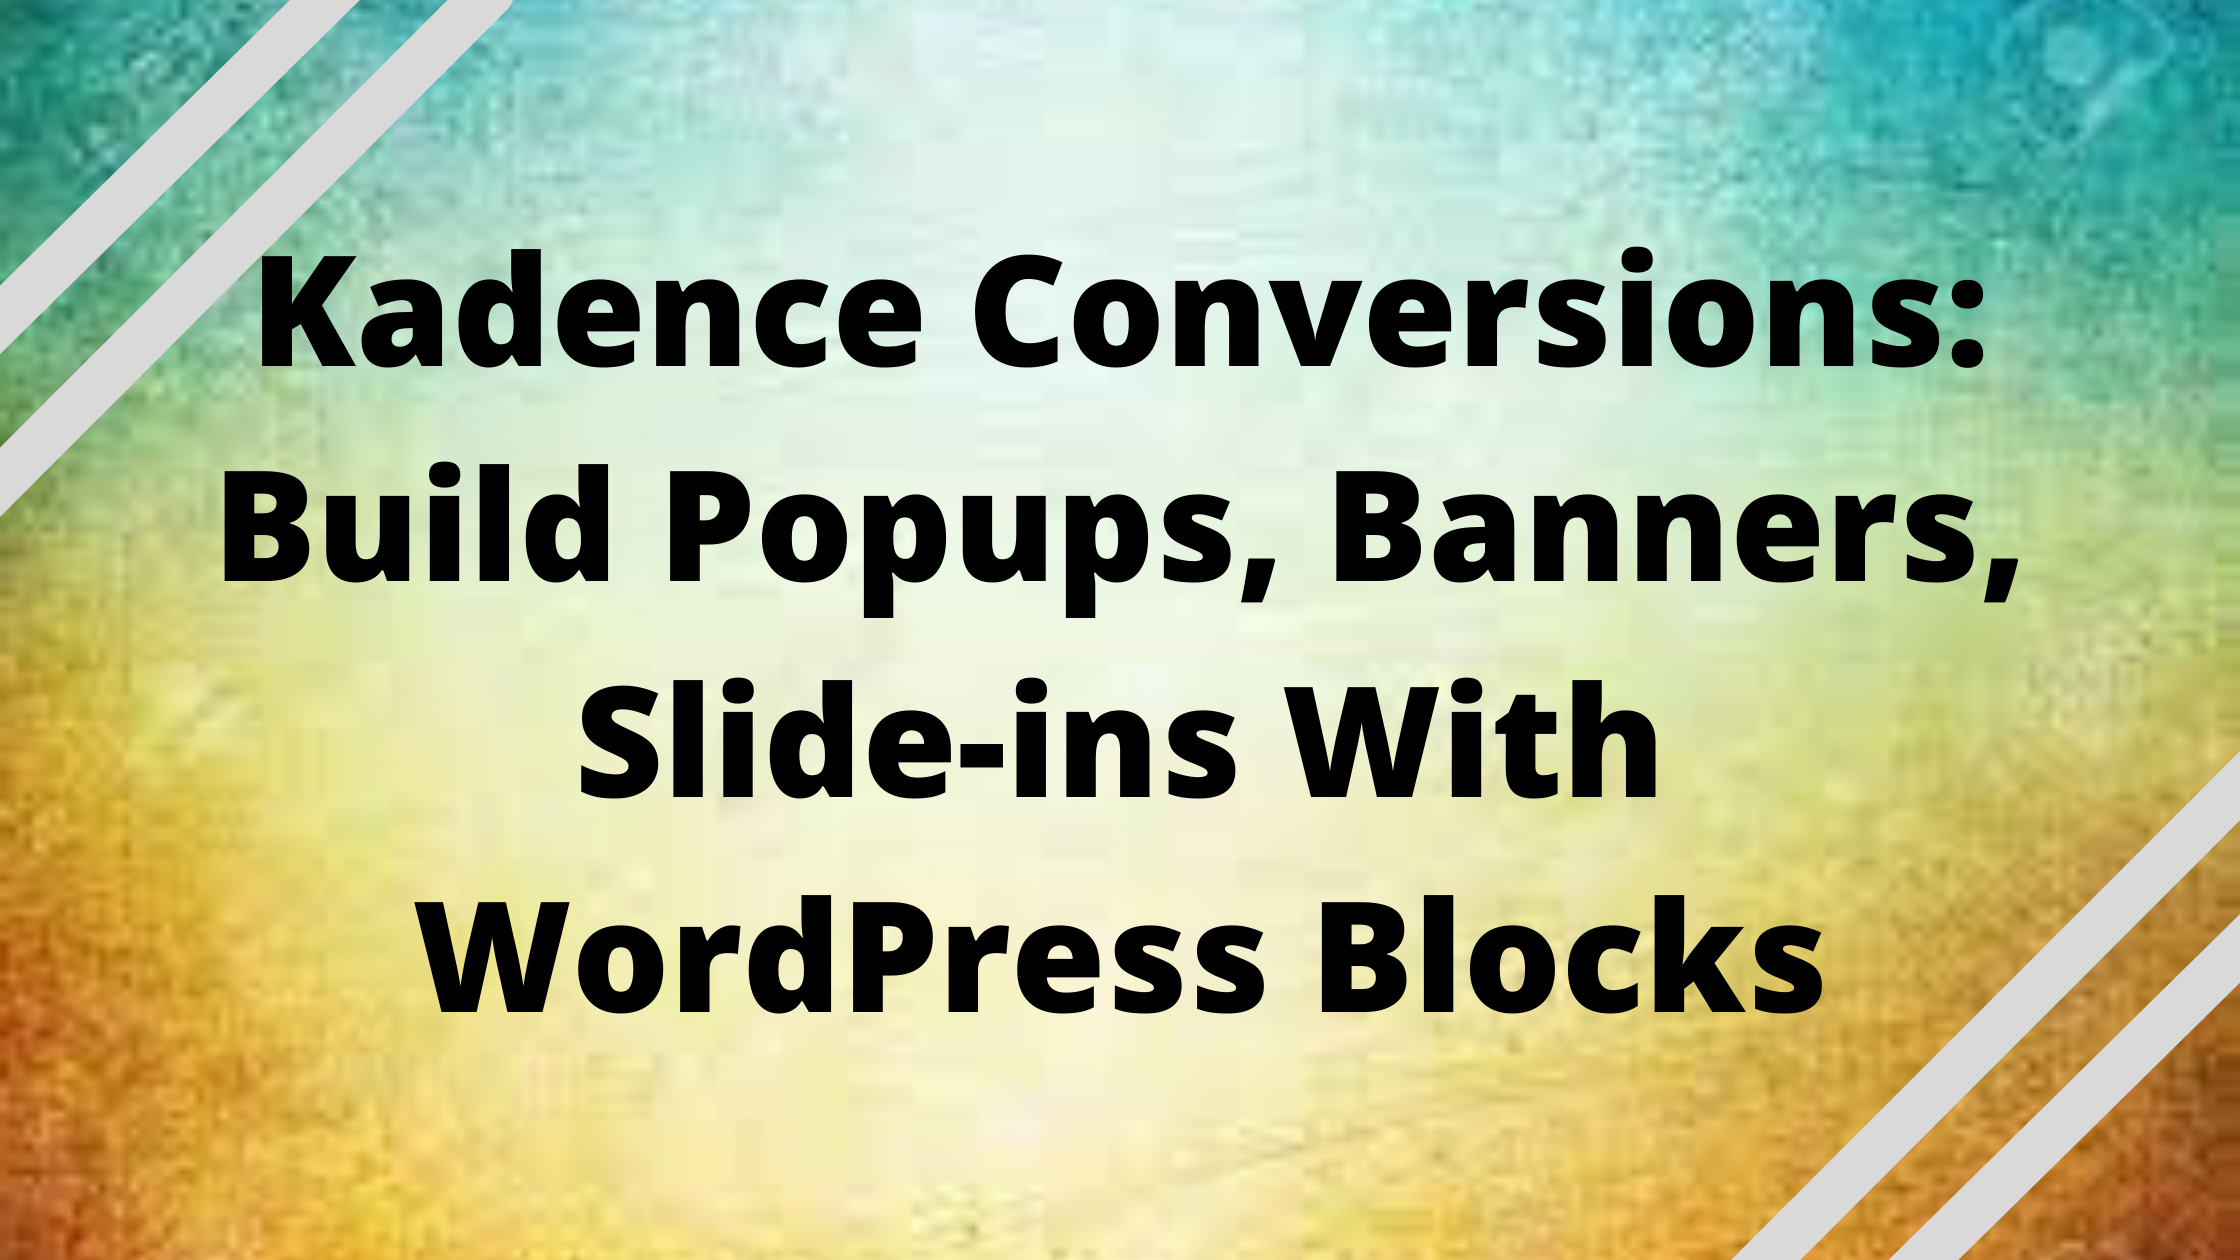 Convert your users with Kadence Conversions